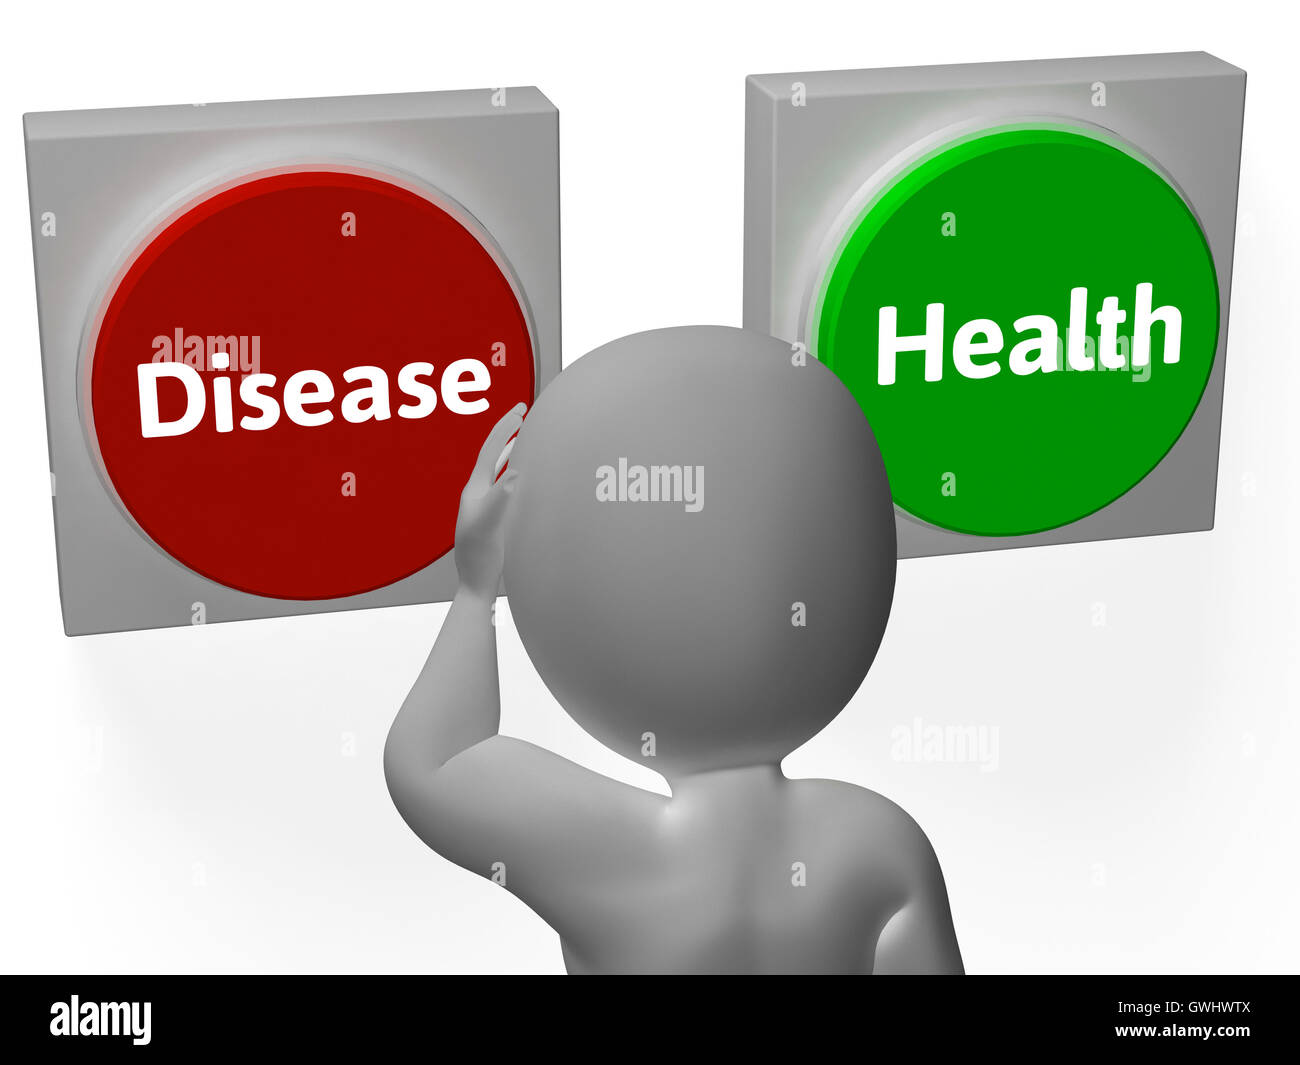 Disease Health Buttons Show Sickness Or Medicine Stock Photo